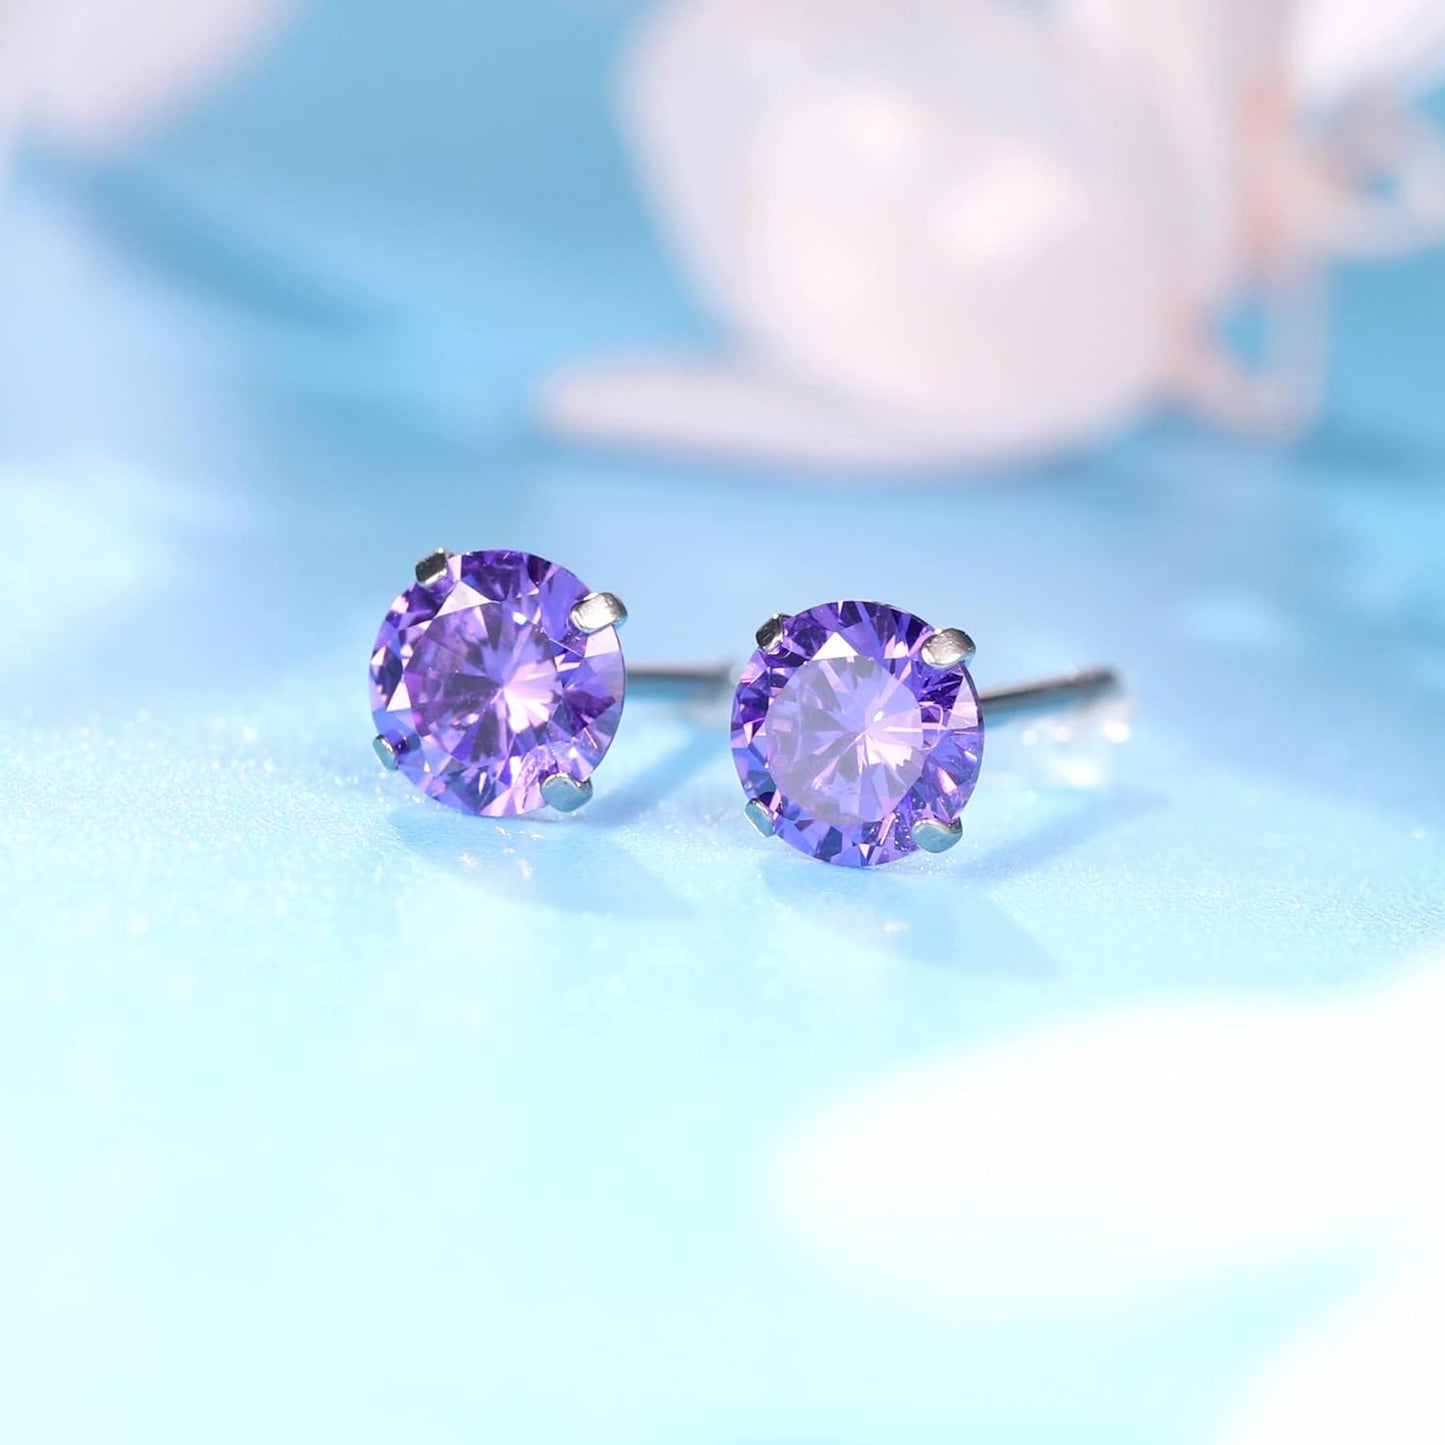 Hypoallergenic Titanium Earrings, Pure Titanium Implant Grade, Suitable for Sensitive Ears with Birthstone Crystals CZ Simulated Diamonds